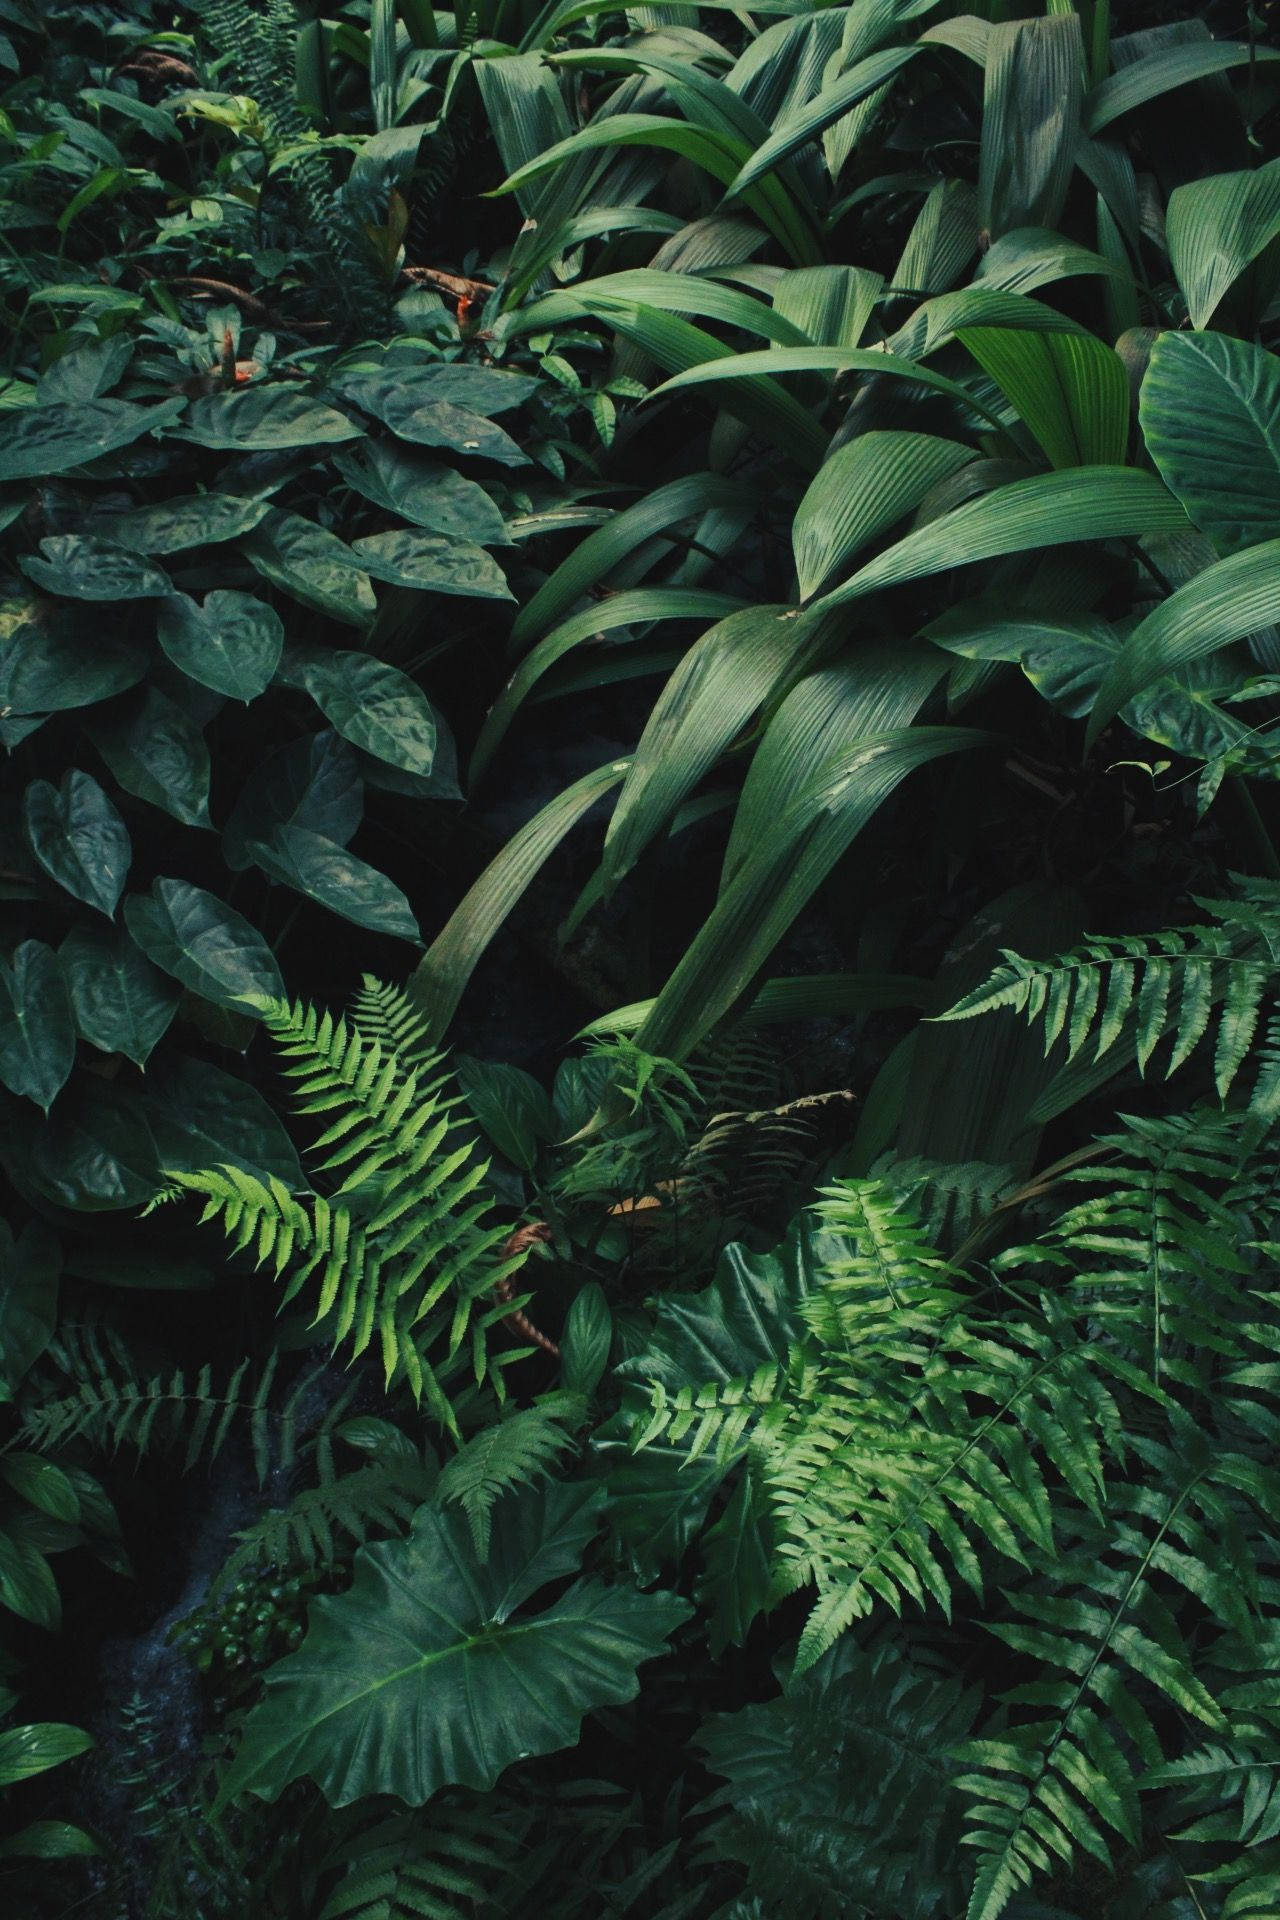 A lush green forest with many different types of plants - Jungle, plants